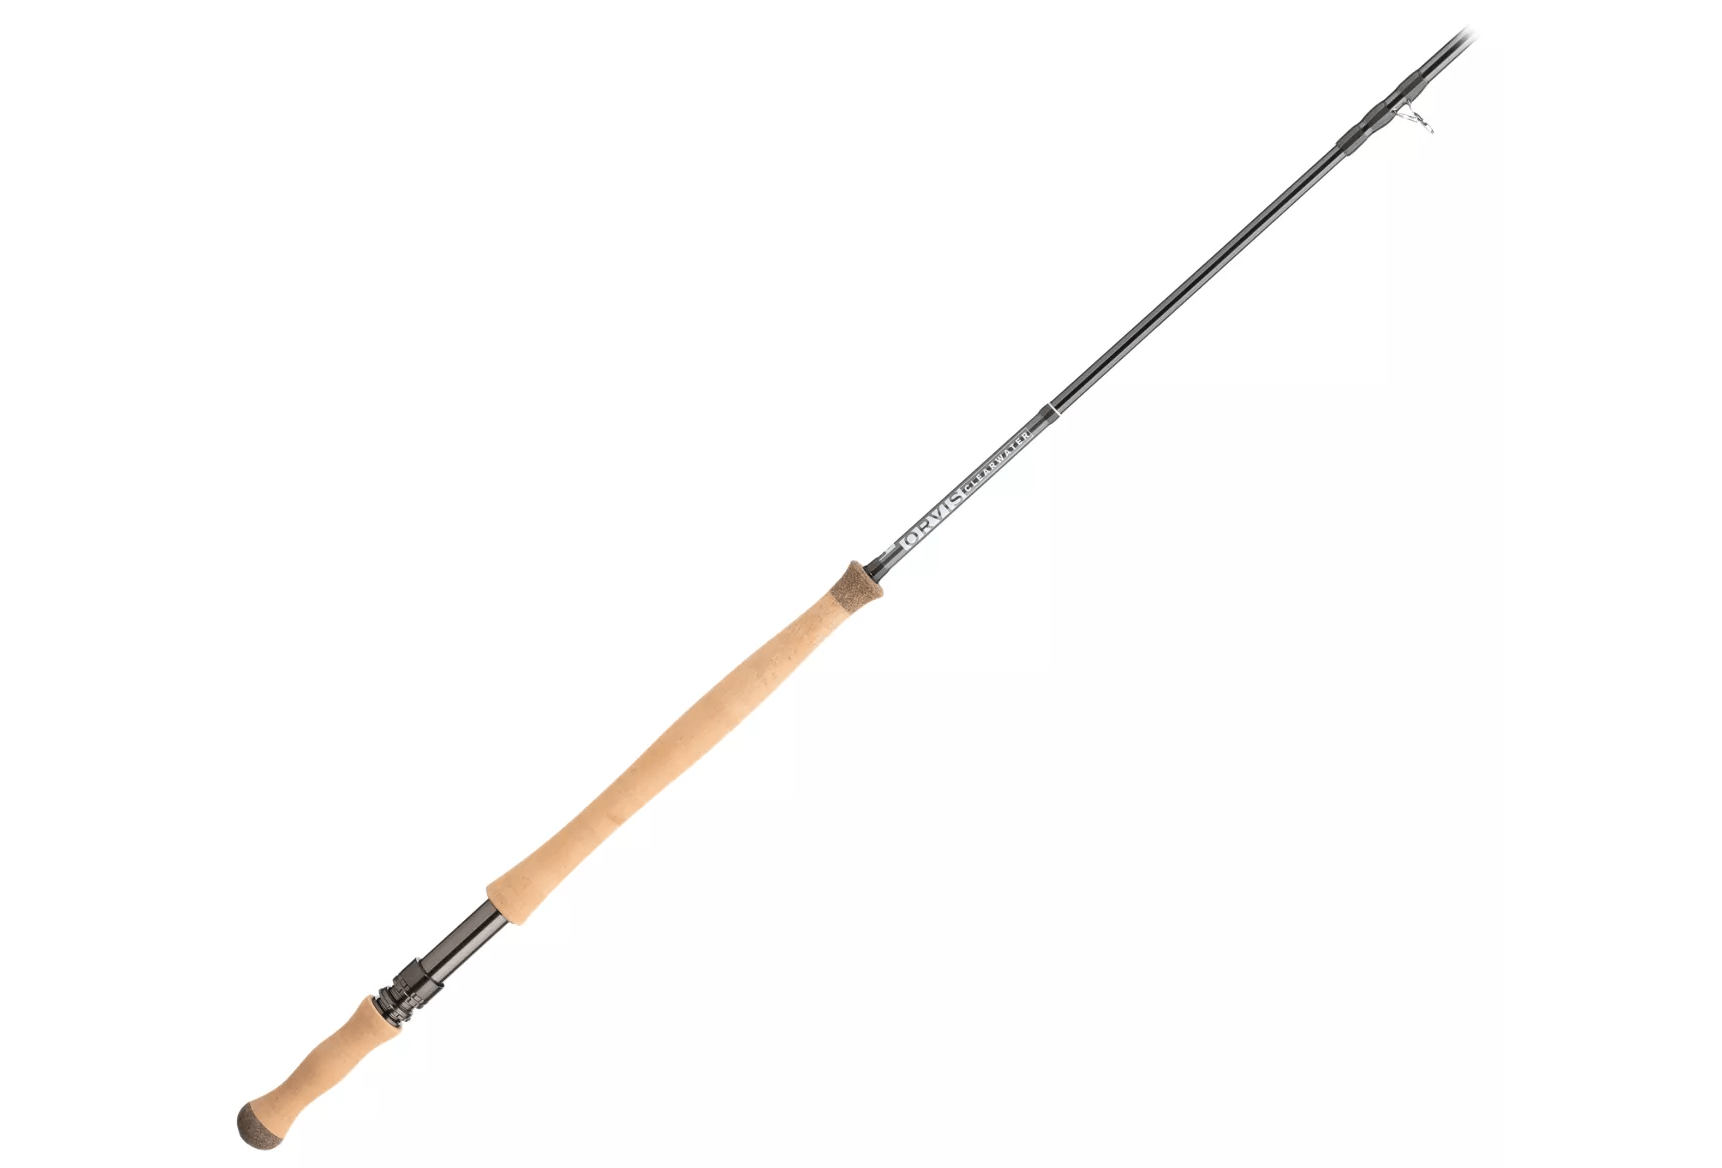 Orvis Clearwater® Two-Handed Fly Rod · 13' · 7 wt